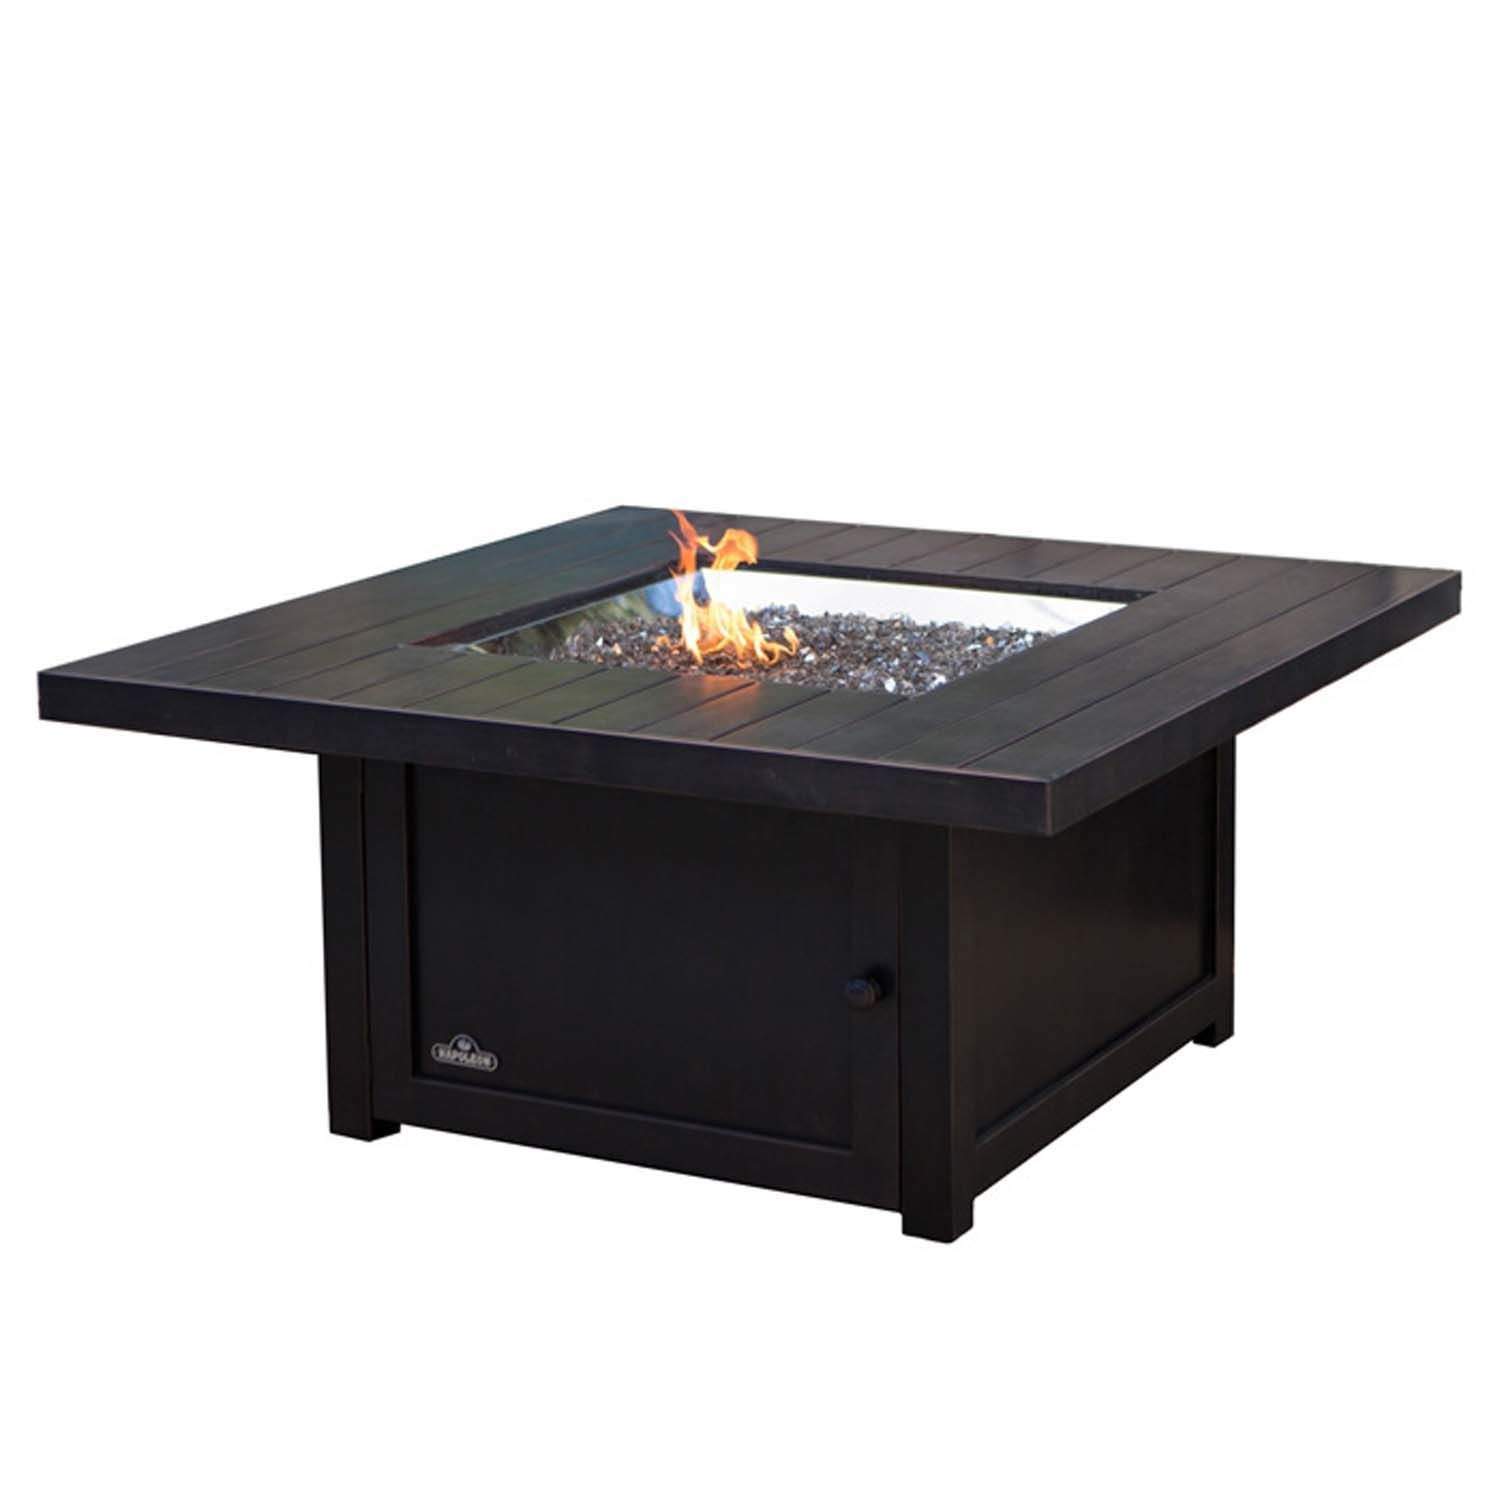 high-quality firepit table